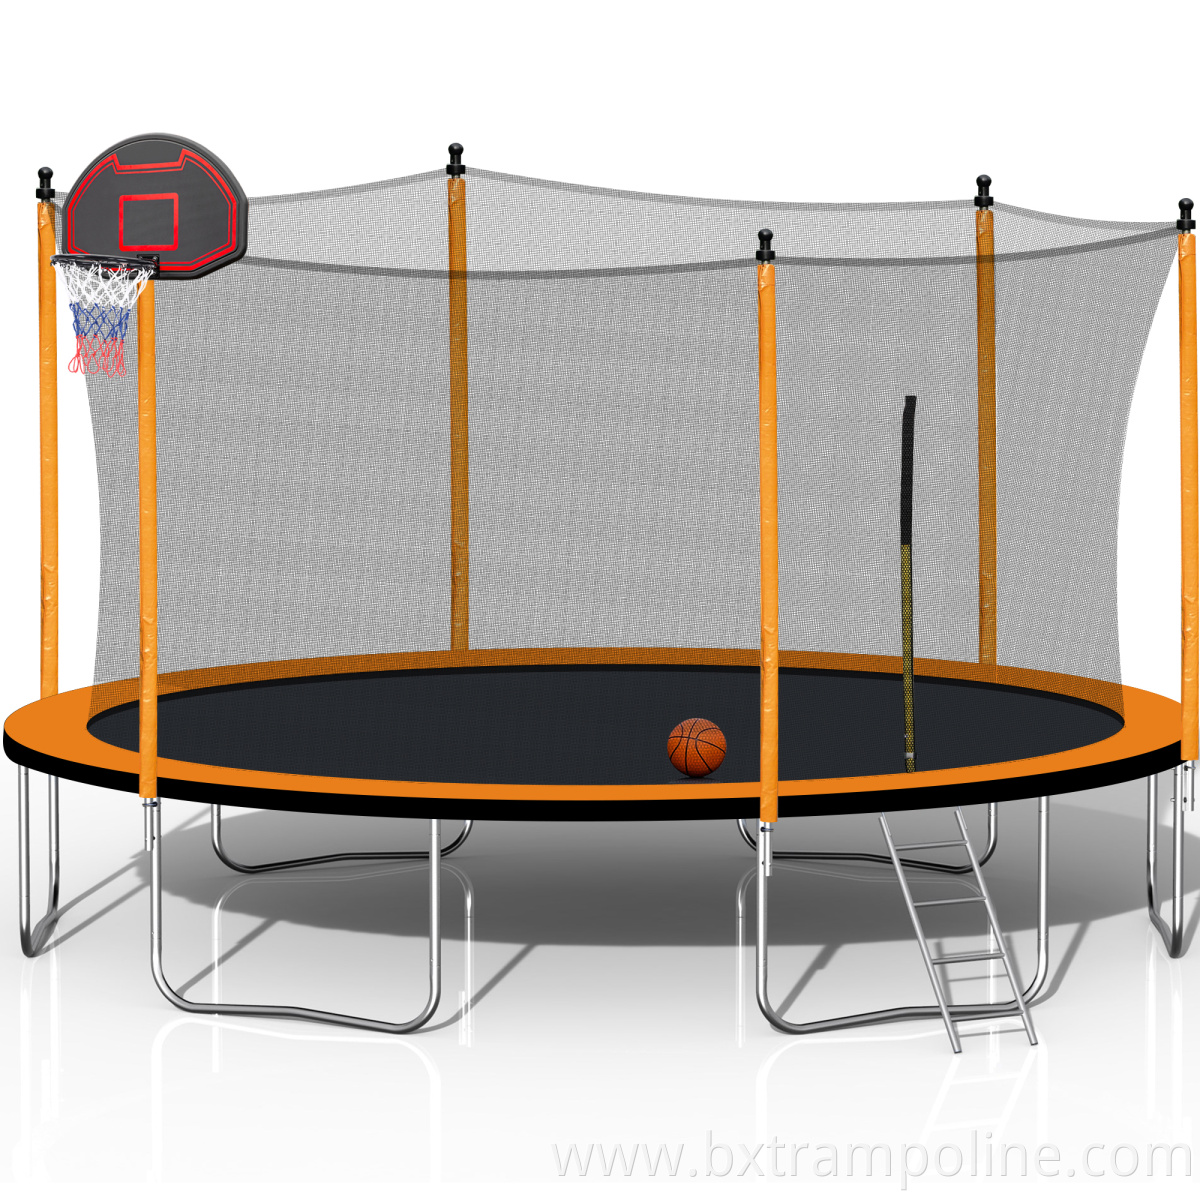 Cheap Trampolines Outdoor 14 Feet Small Home Gym Jumping Buyatrampoline Trampoline For Children